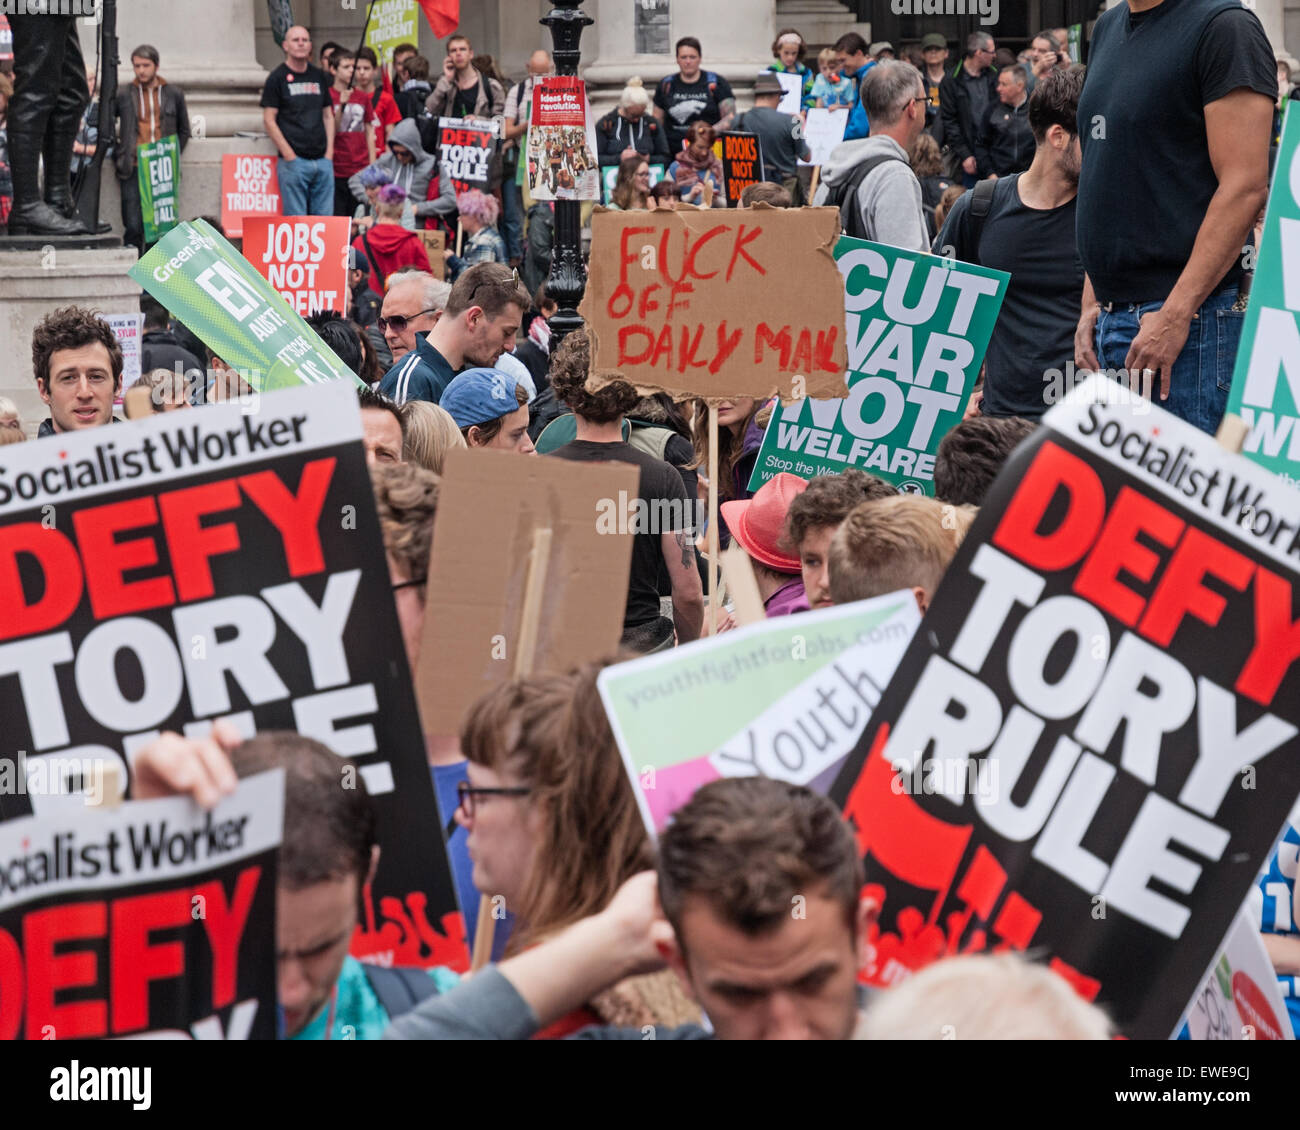 Anti austerity march in London City, June 2015, outside the Bank of England. Stock Photo